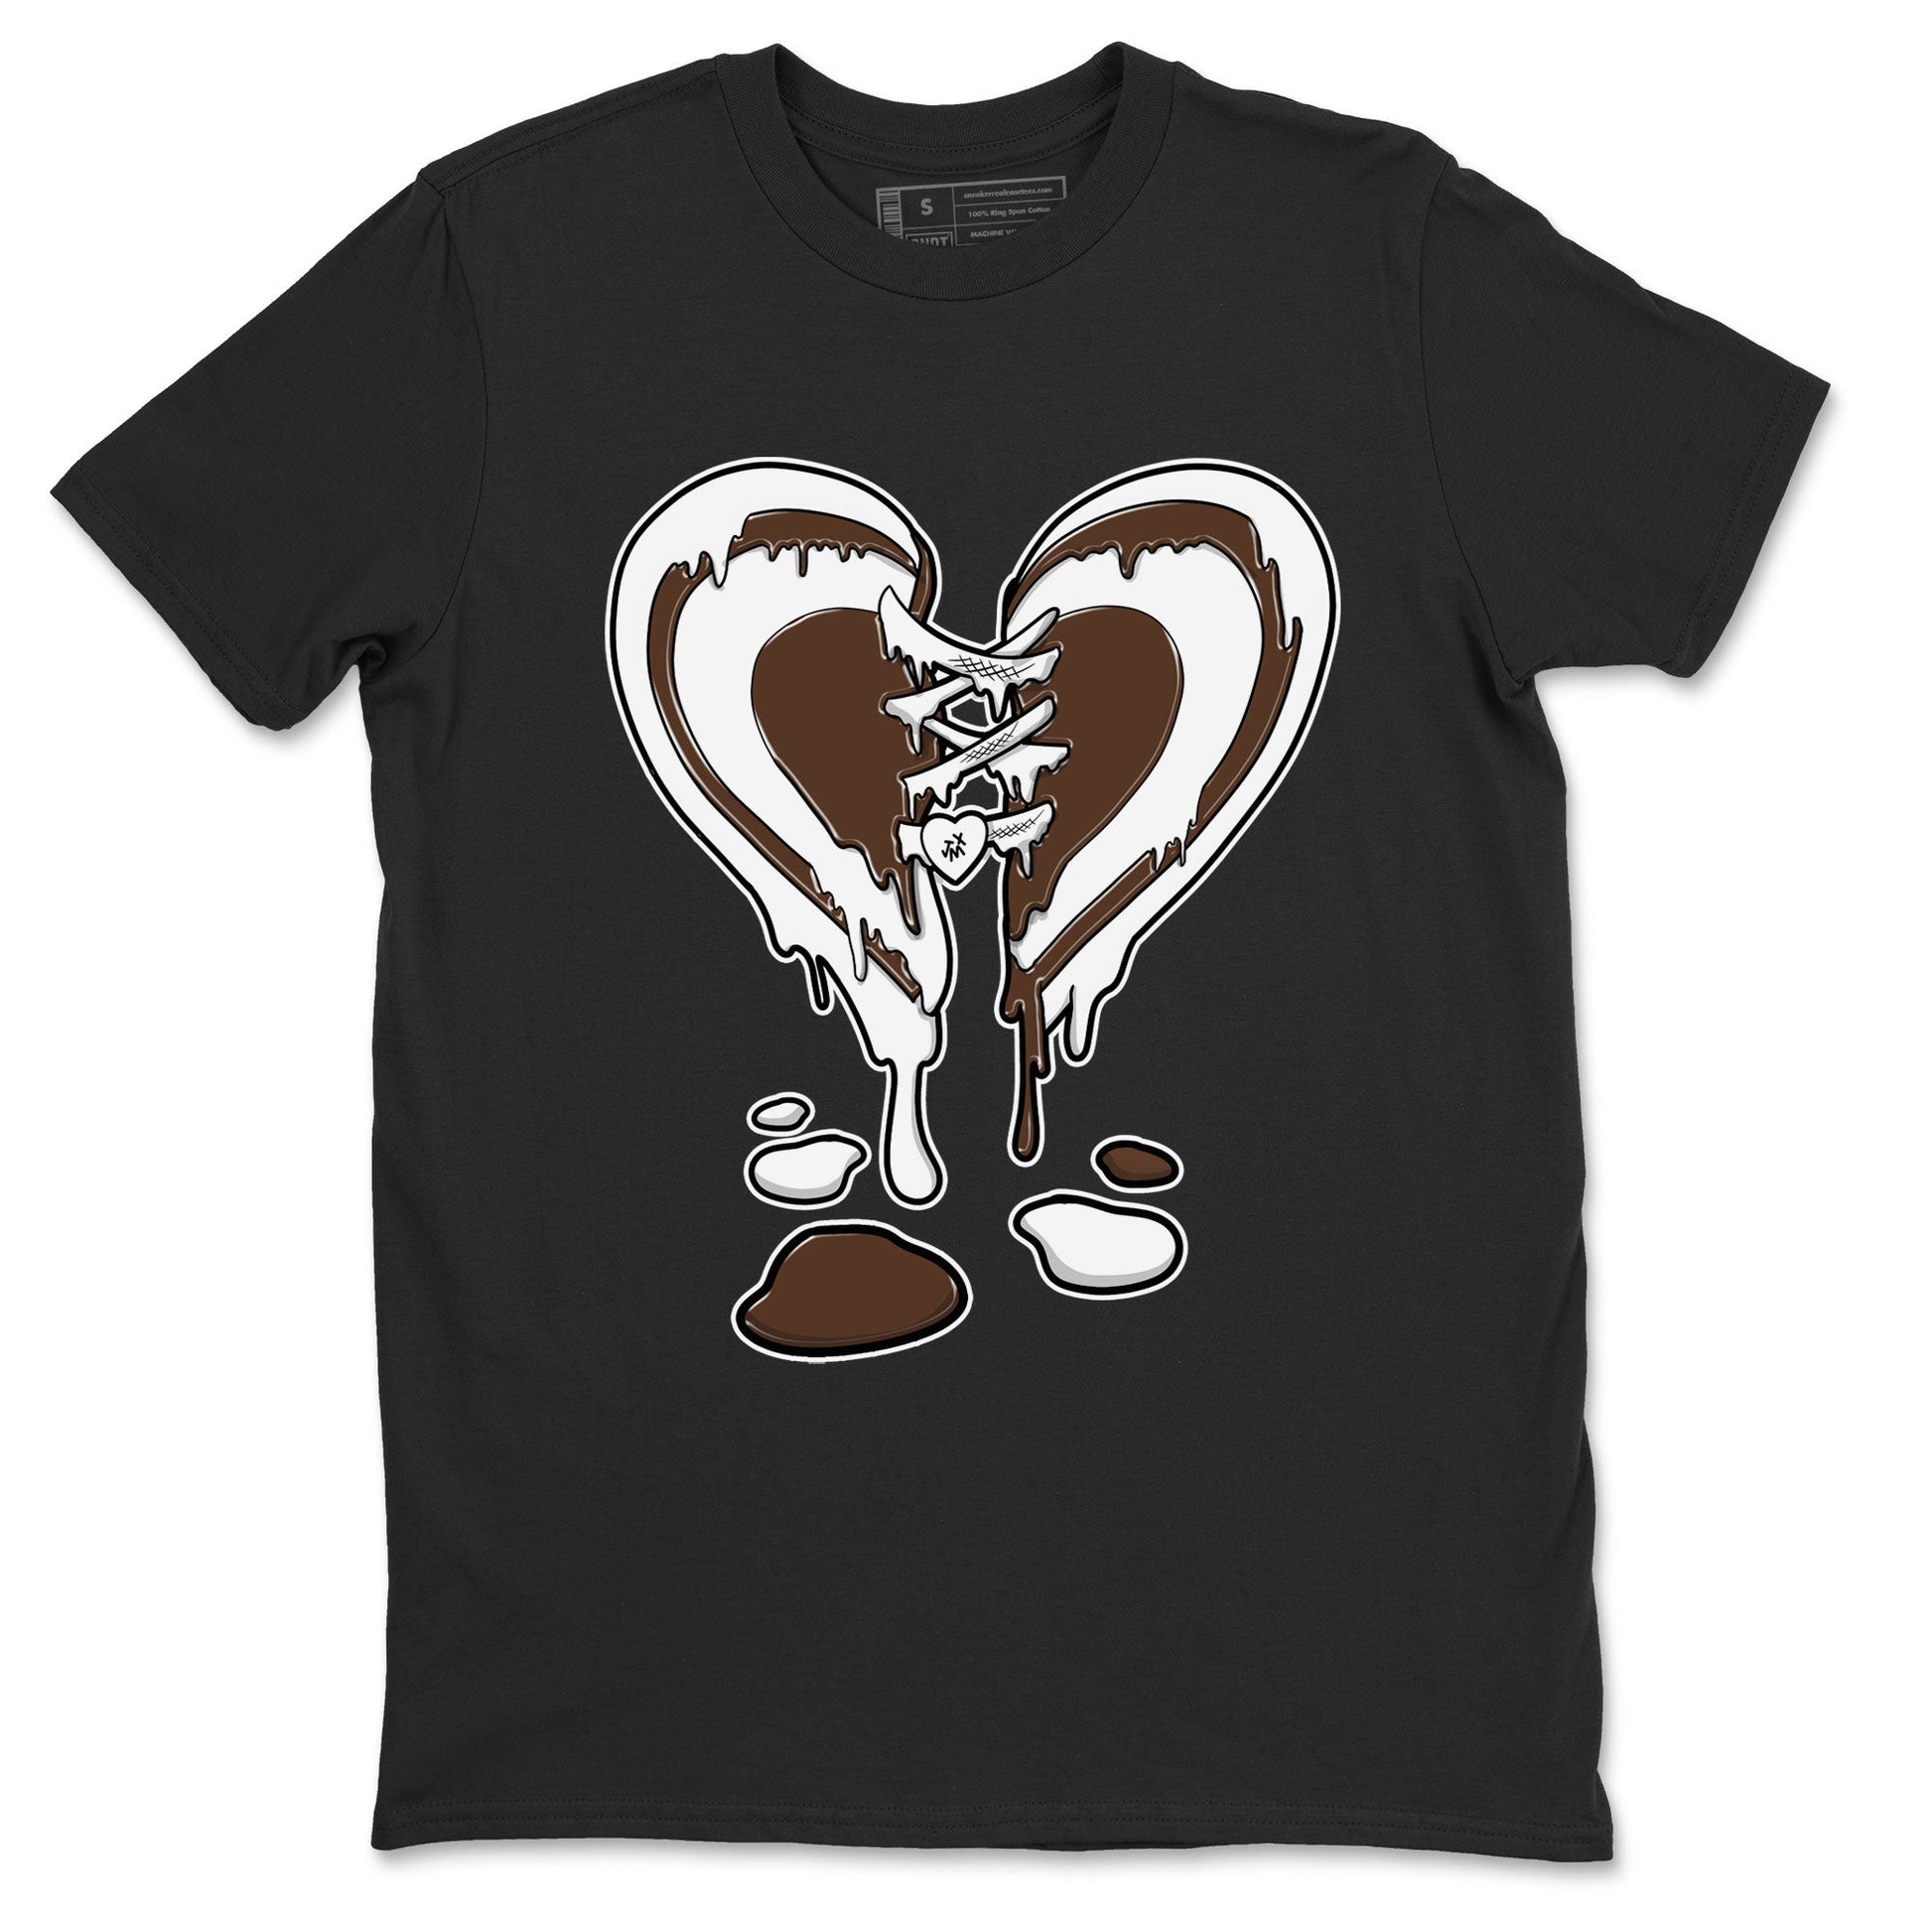 AF1 Chocolate shirt to match jordans Melting Heart sneaker tees Air Force 1 Chocolate SNRT Sneaker Release Tees Cotton Sneaker Tee Black 2 T-Shirt